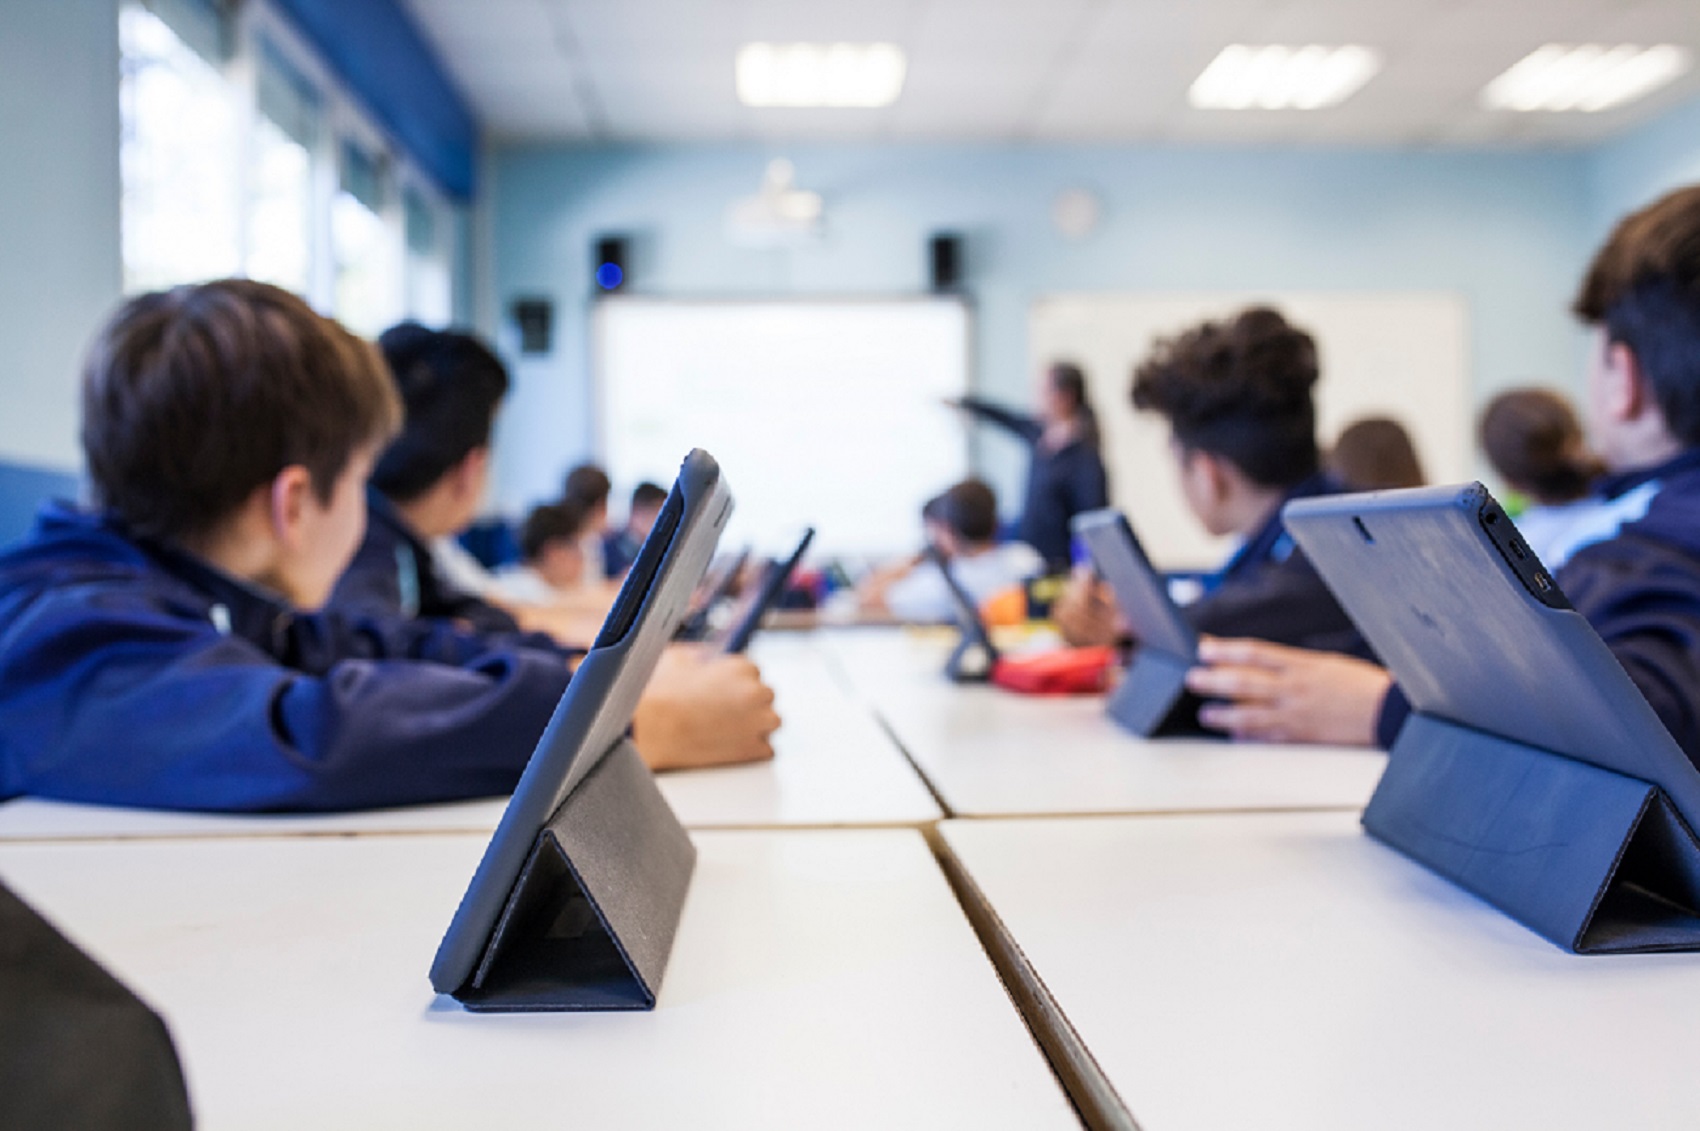 Local schools are being urged by Advantex to tap into £150 million of Department for Education to improve connectivity before the current scheme closes